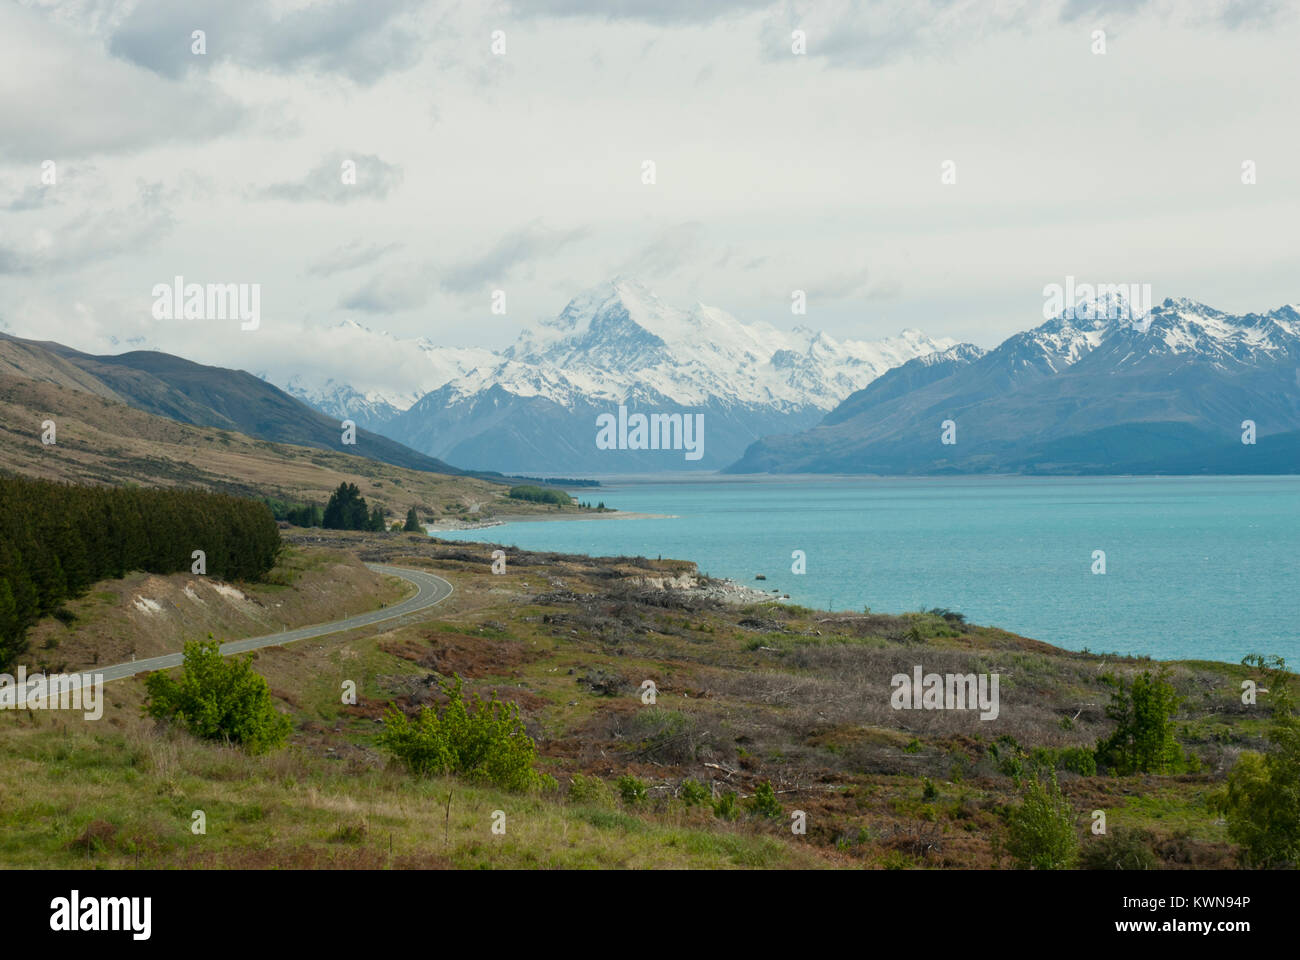 Iconic Mount Cook/Aoraki, snow capped with Mount Cook Road and vividly blue Lake Pukaki in foreground. Sunny, blue sky. Spring/ early Summer. Stock Photo